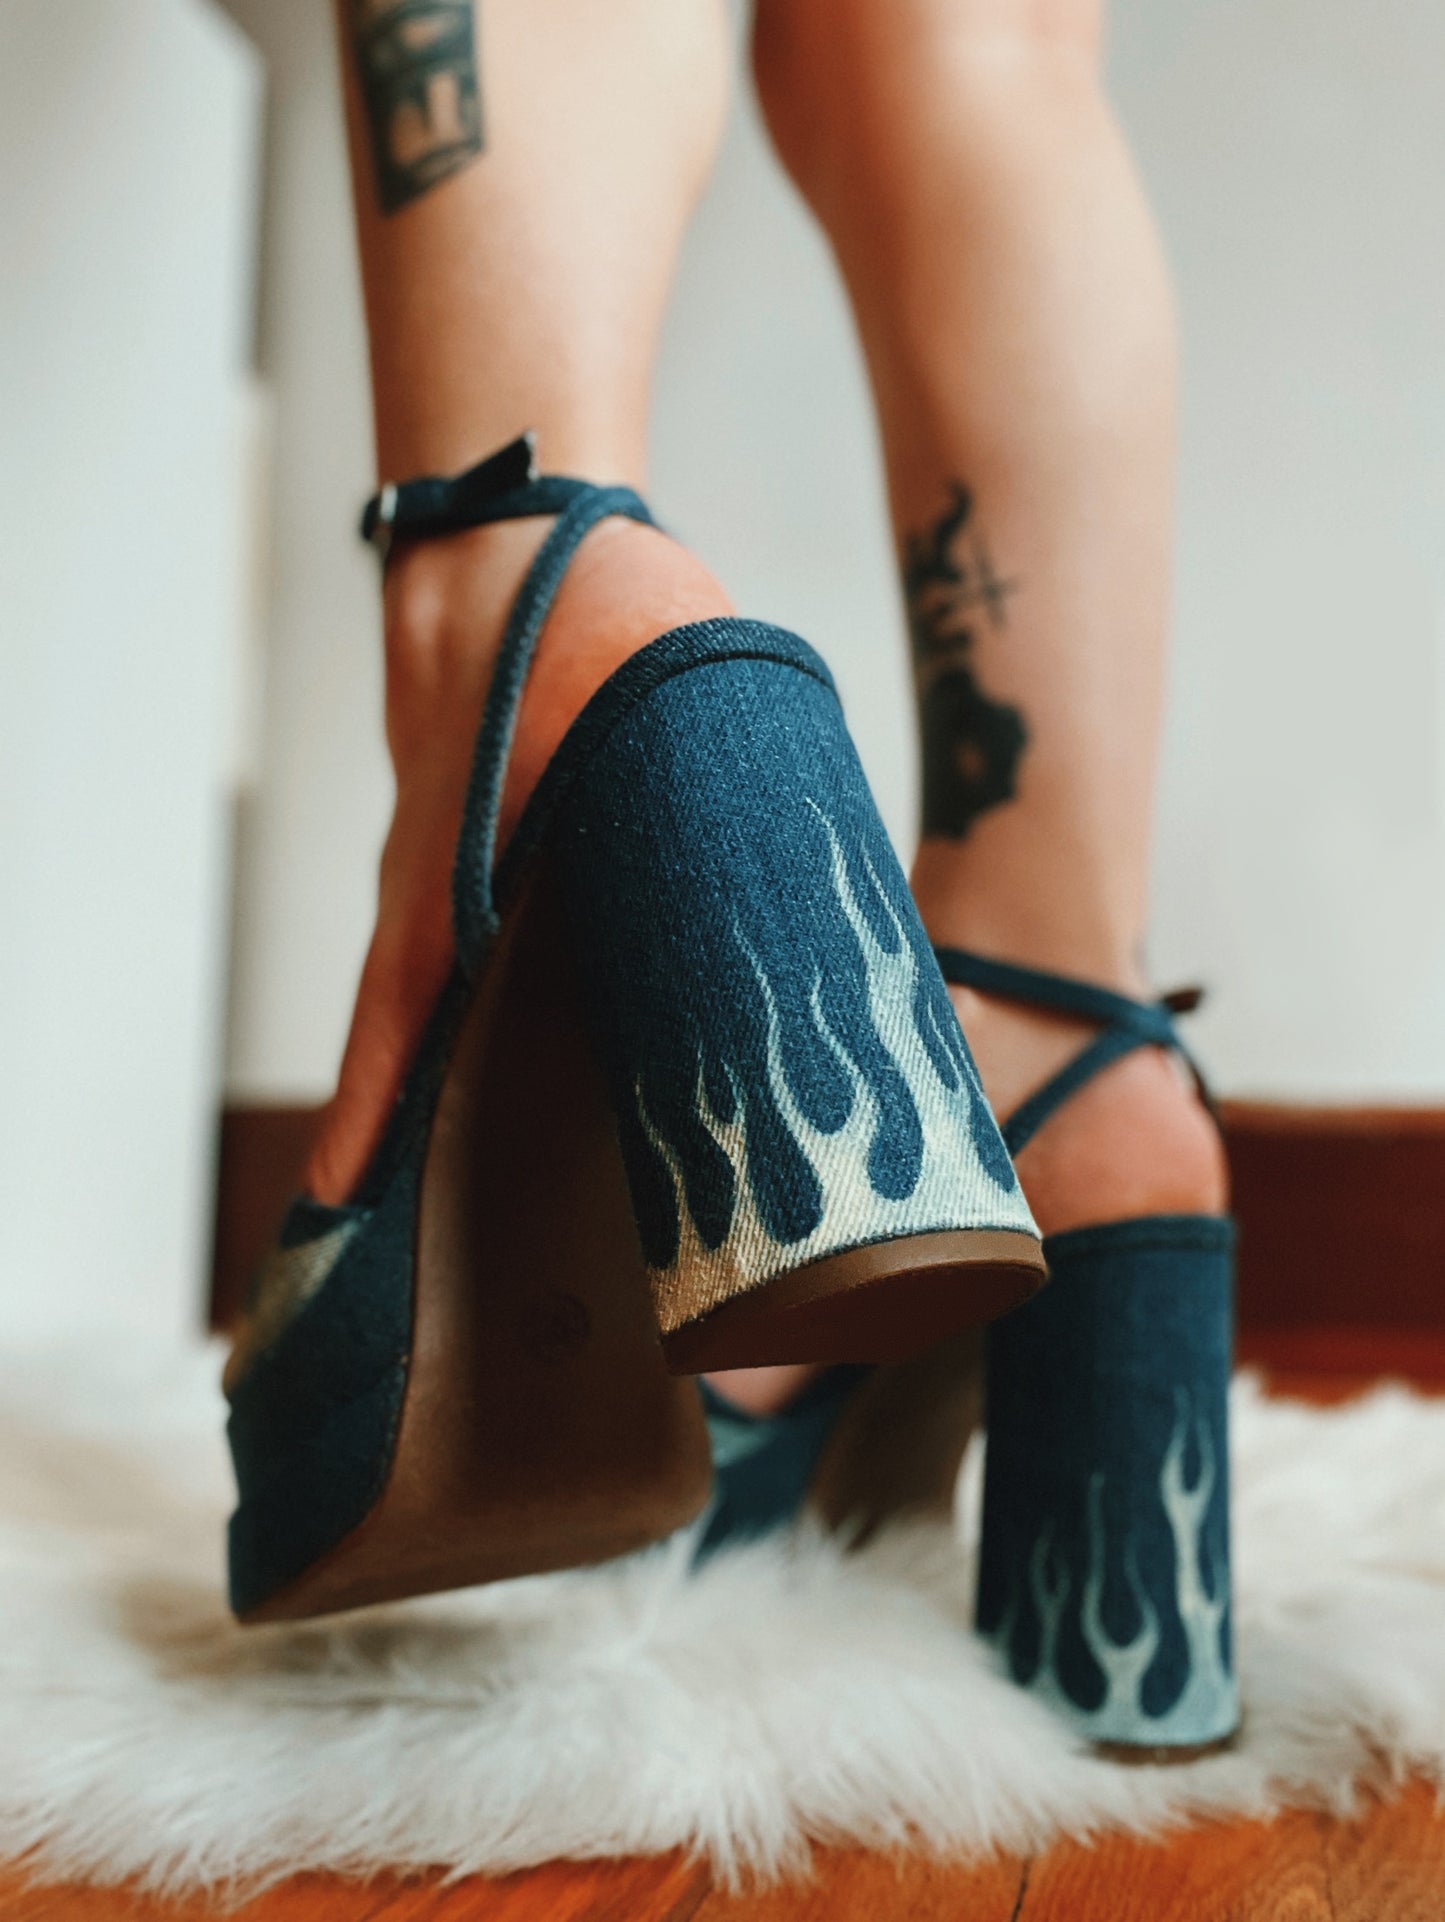 The Hotter Than Hell Heels